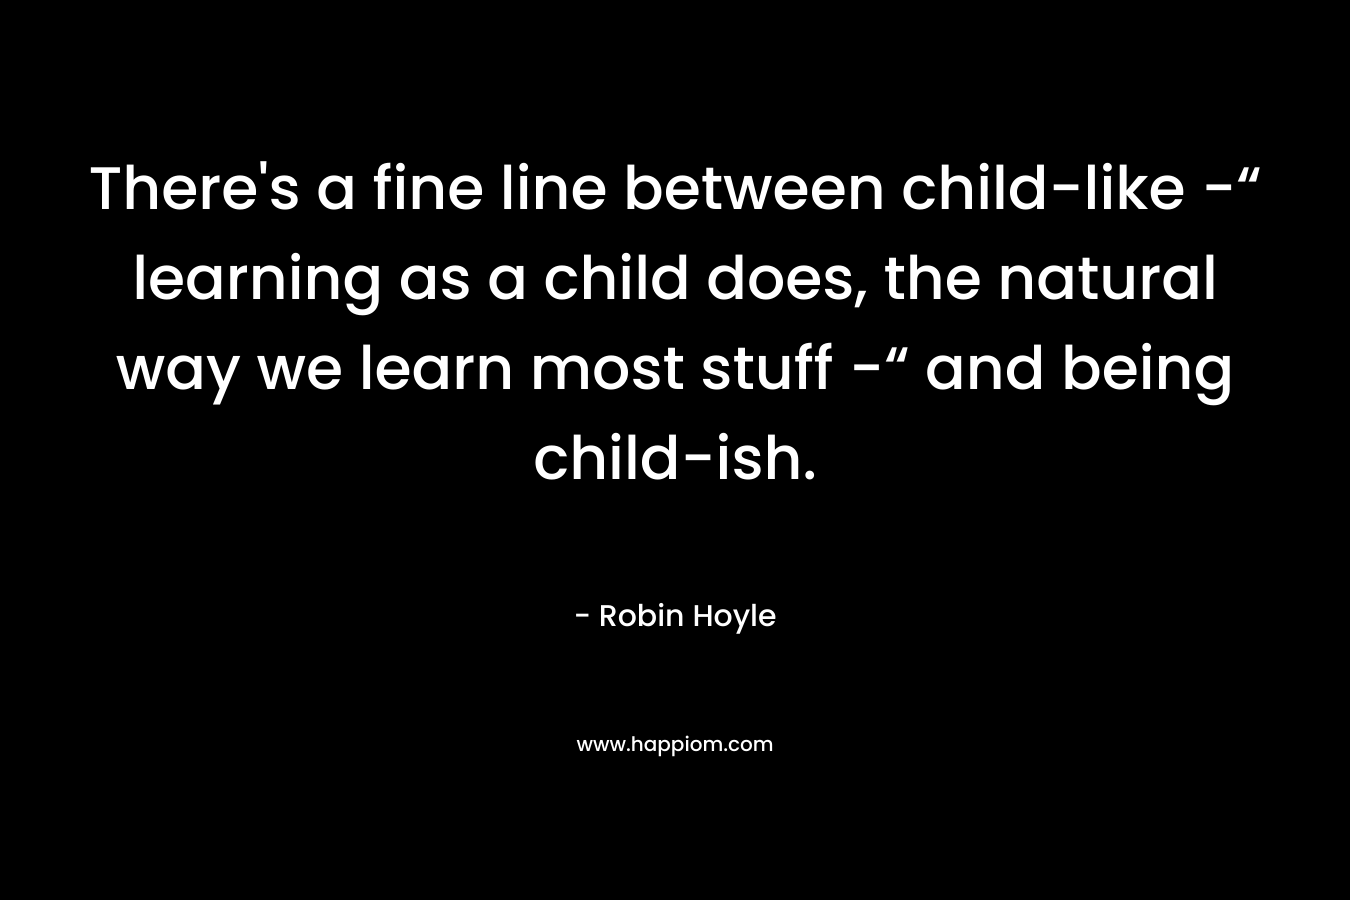 There's a fine line between child-like -“ learning as a child does, the natural way we learn most stuff -“ and being child-ish.